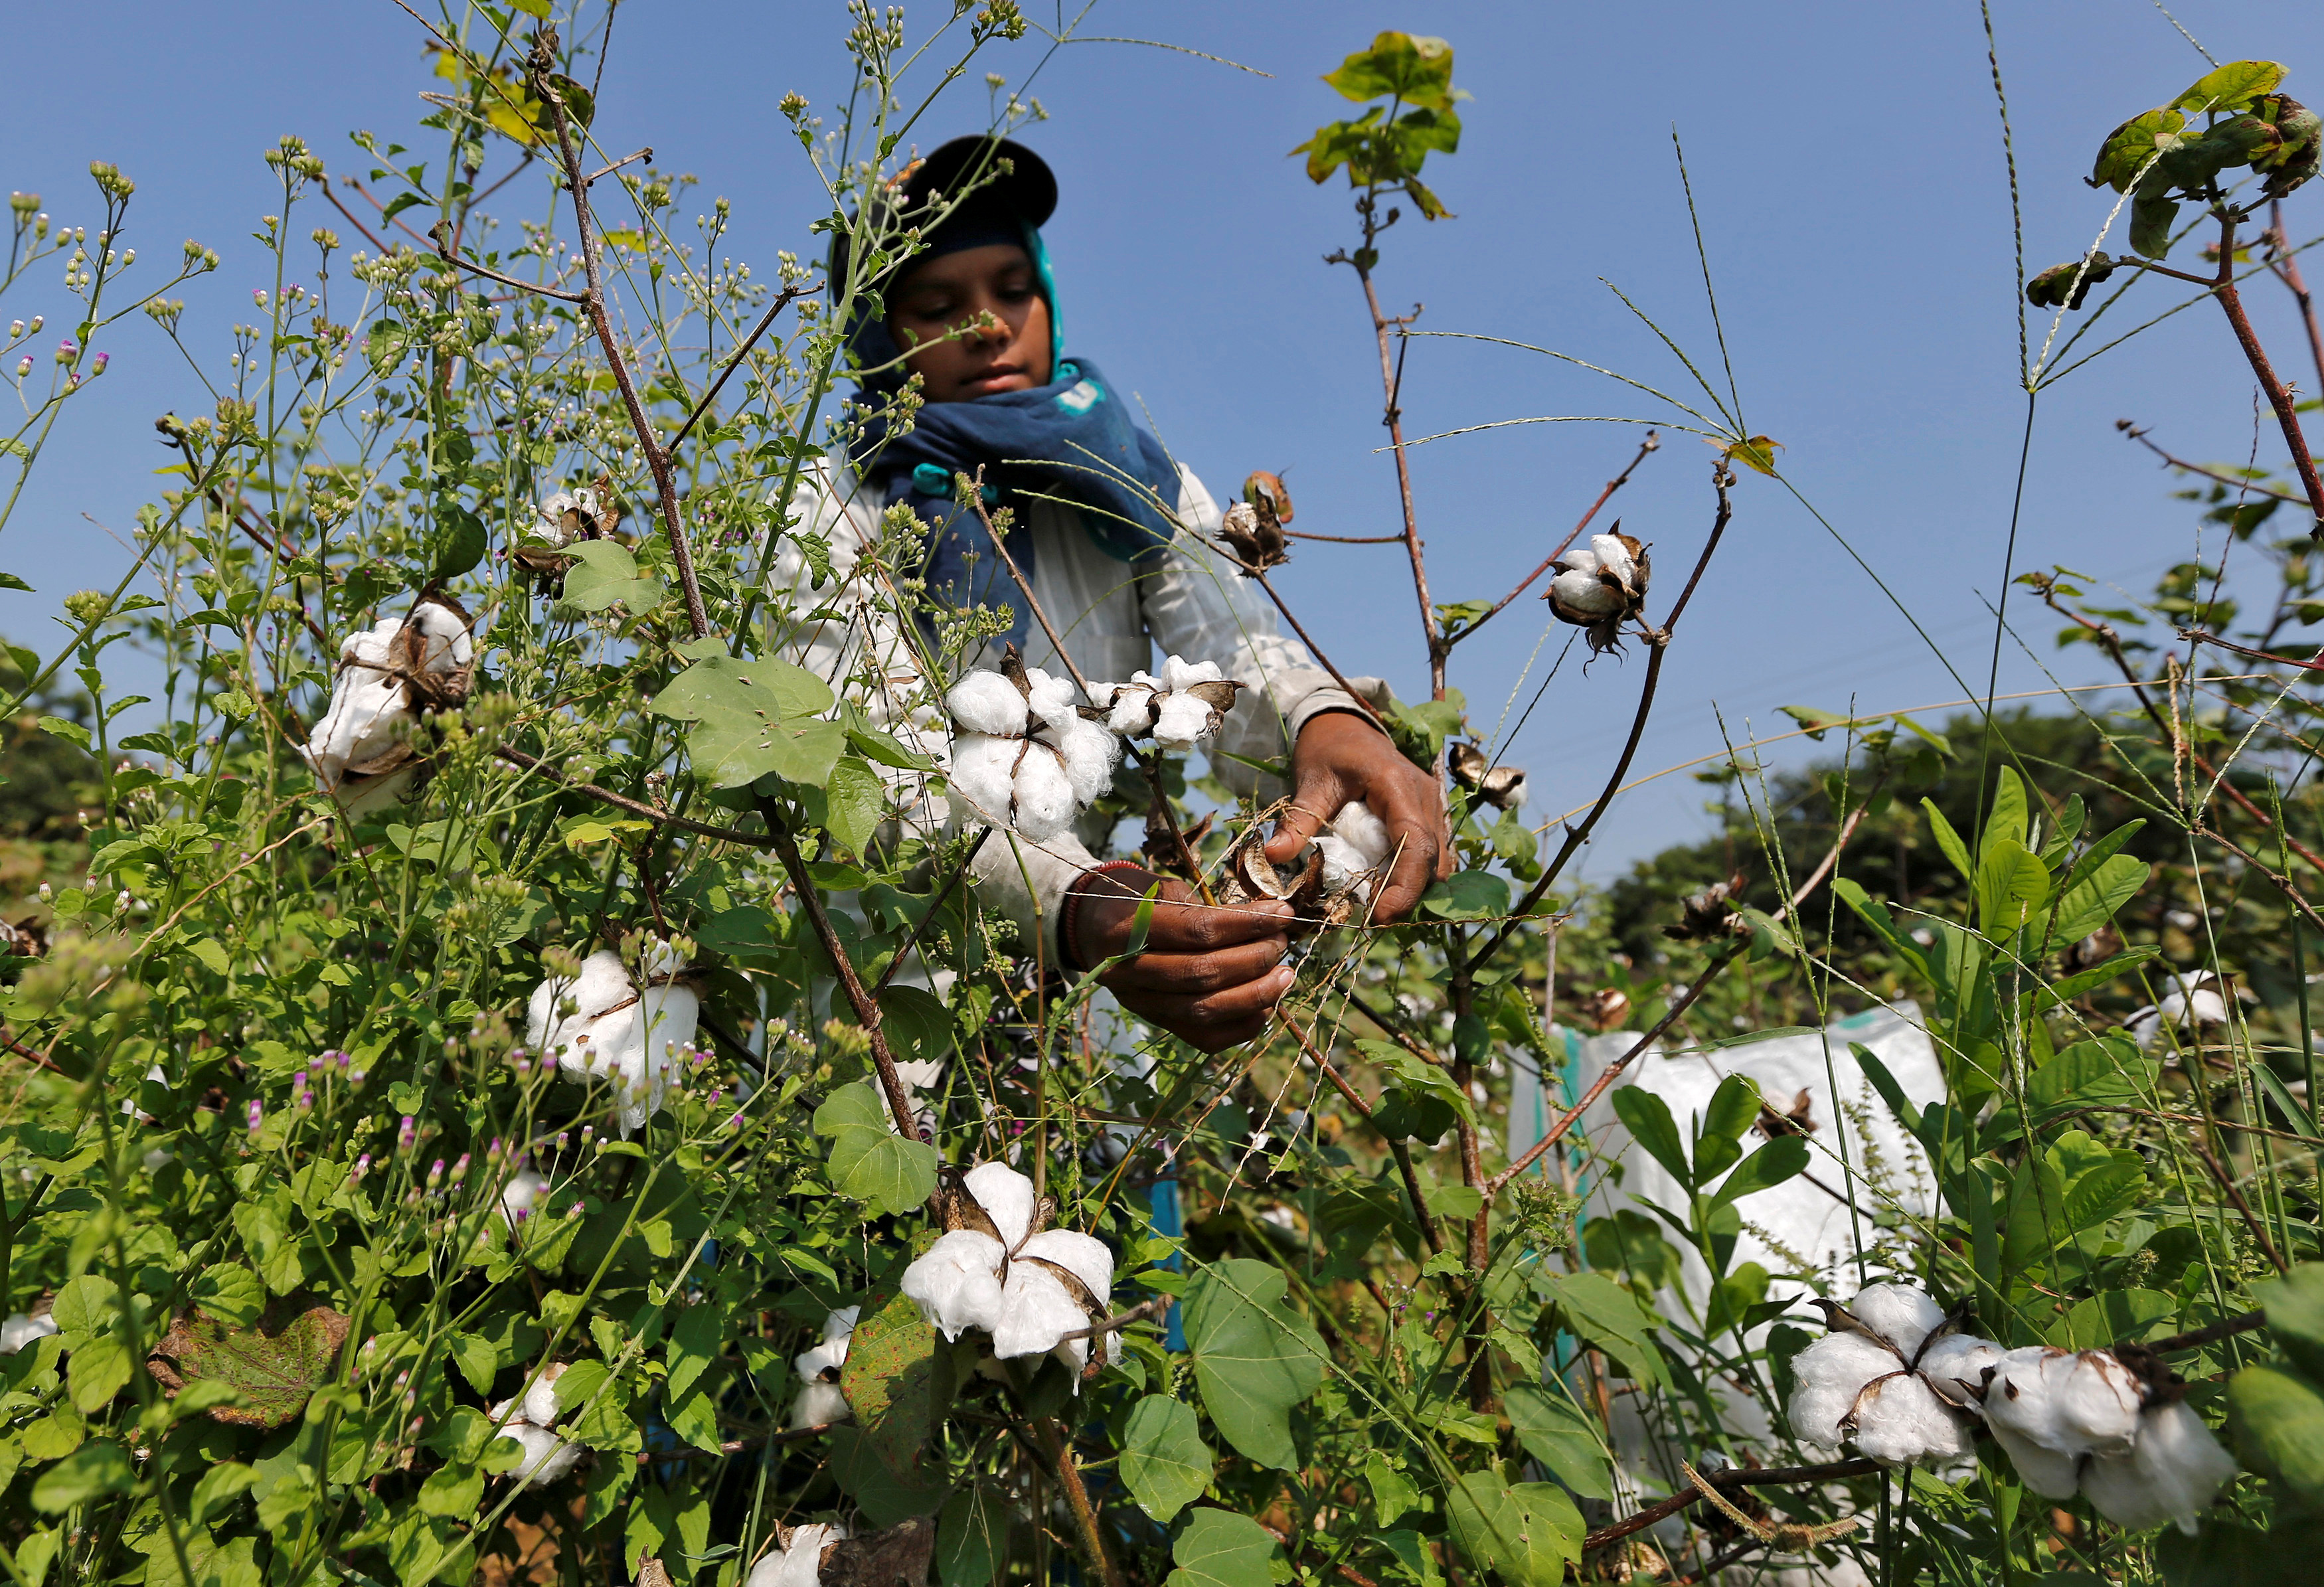 A worker harvests cotton in a field on the outskirts of Ahmedabad